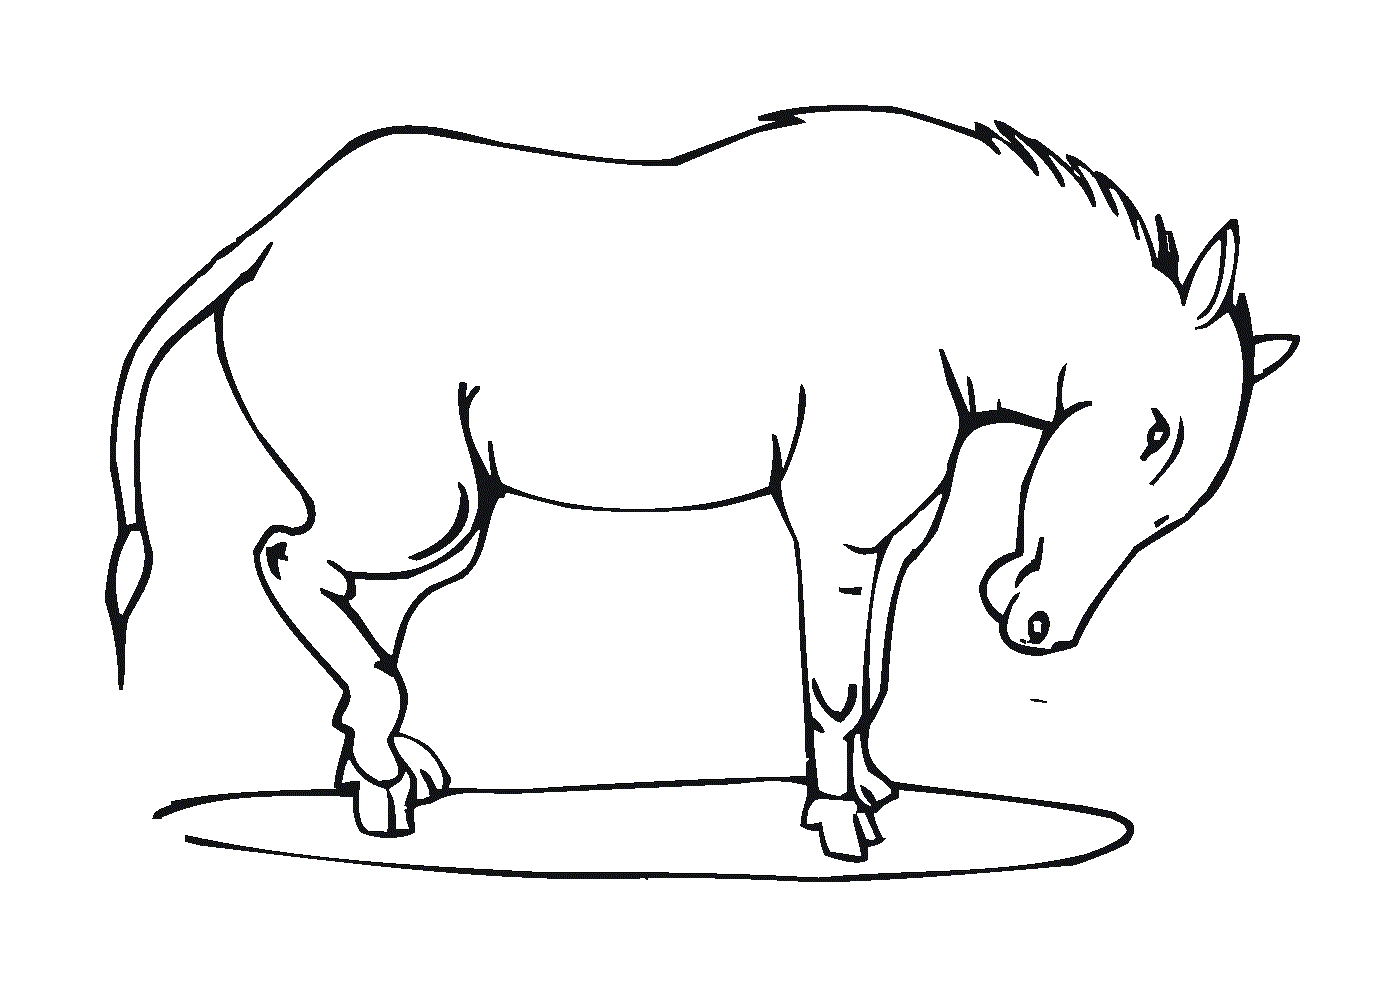 A horse standing with his head down